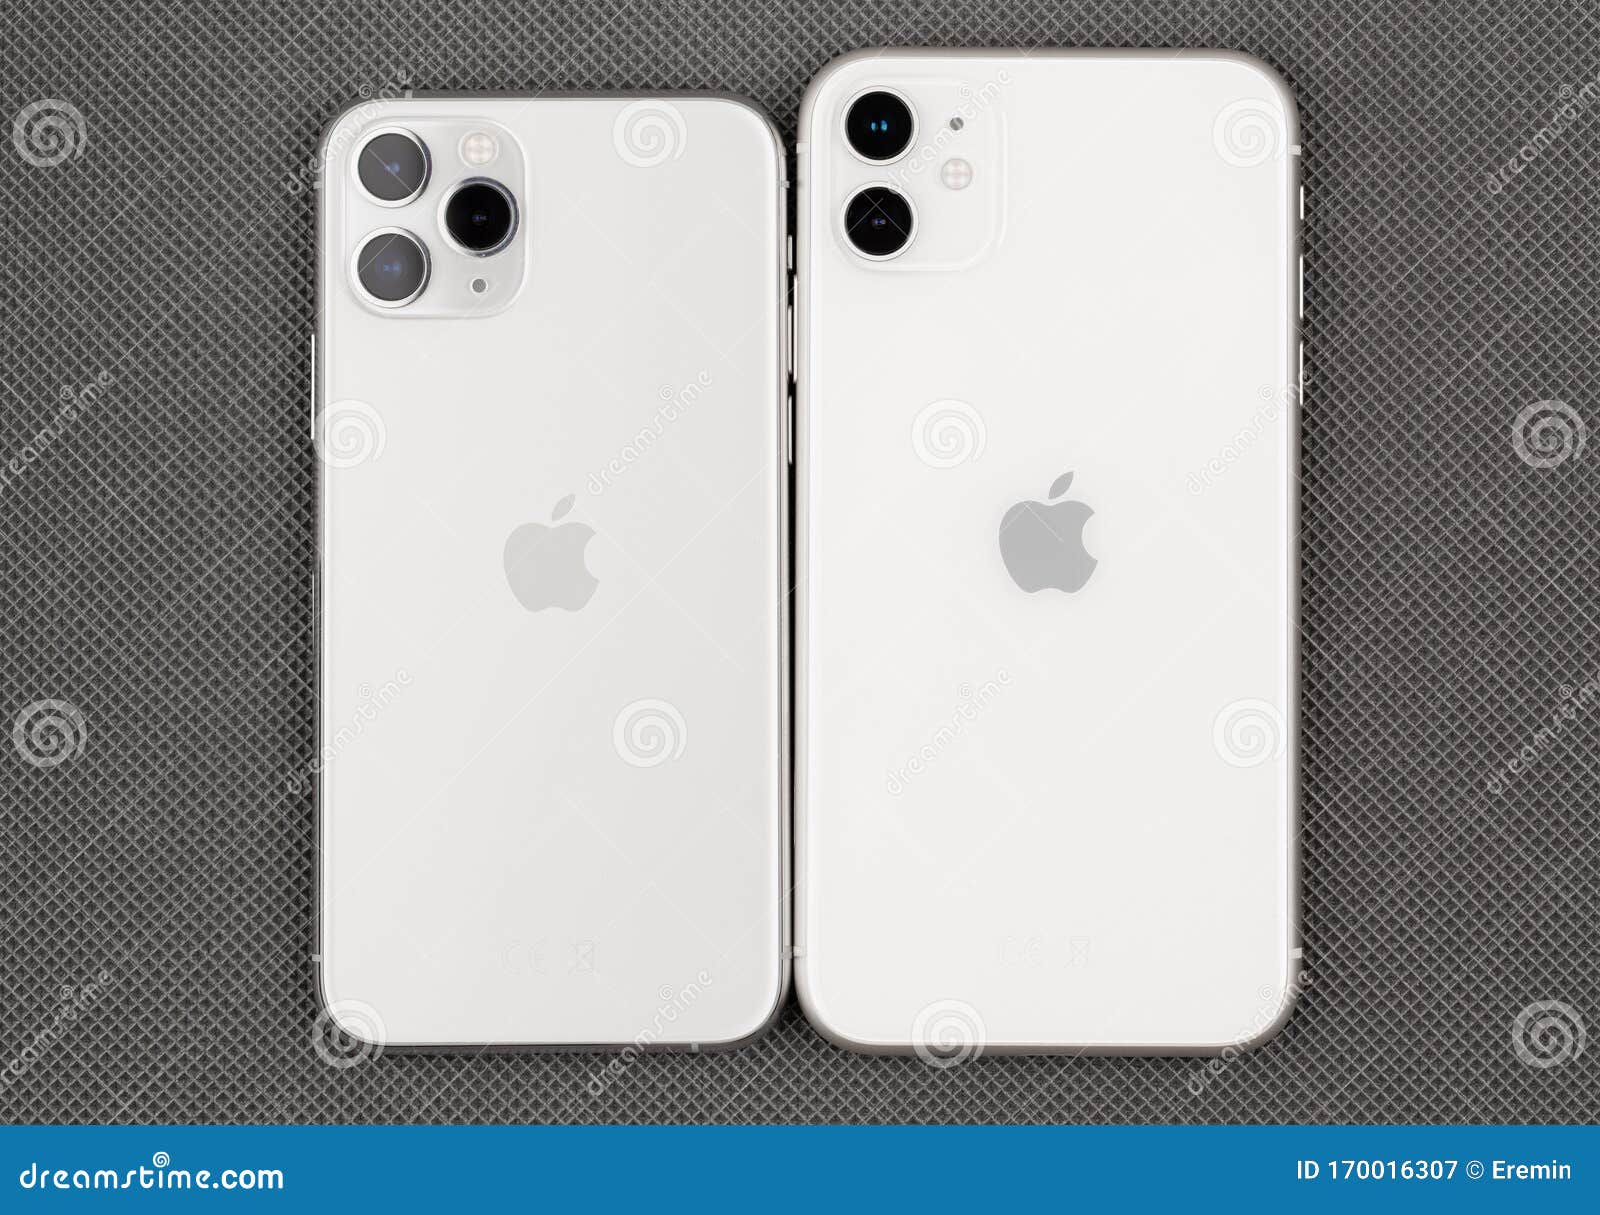 Apple Iphone 11 White And Apple Iphone 11 Pro Silver Color On A Gray Surface Editorial Photography Image Of Everyday Carry